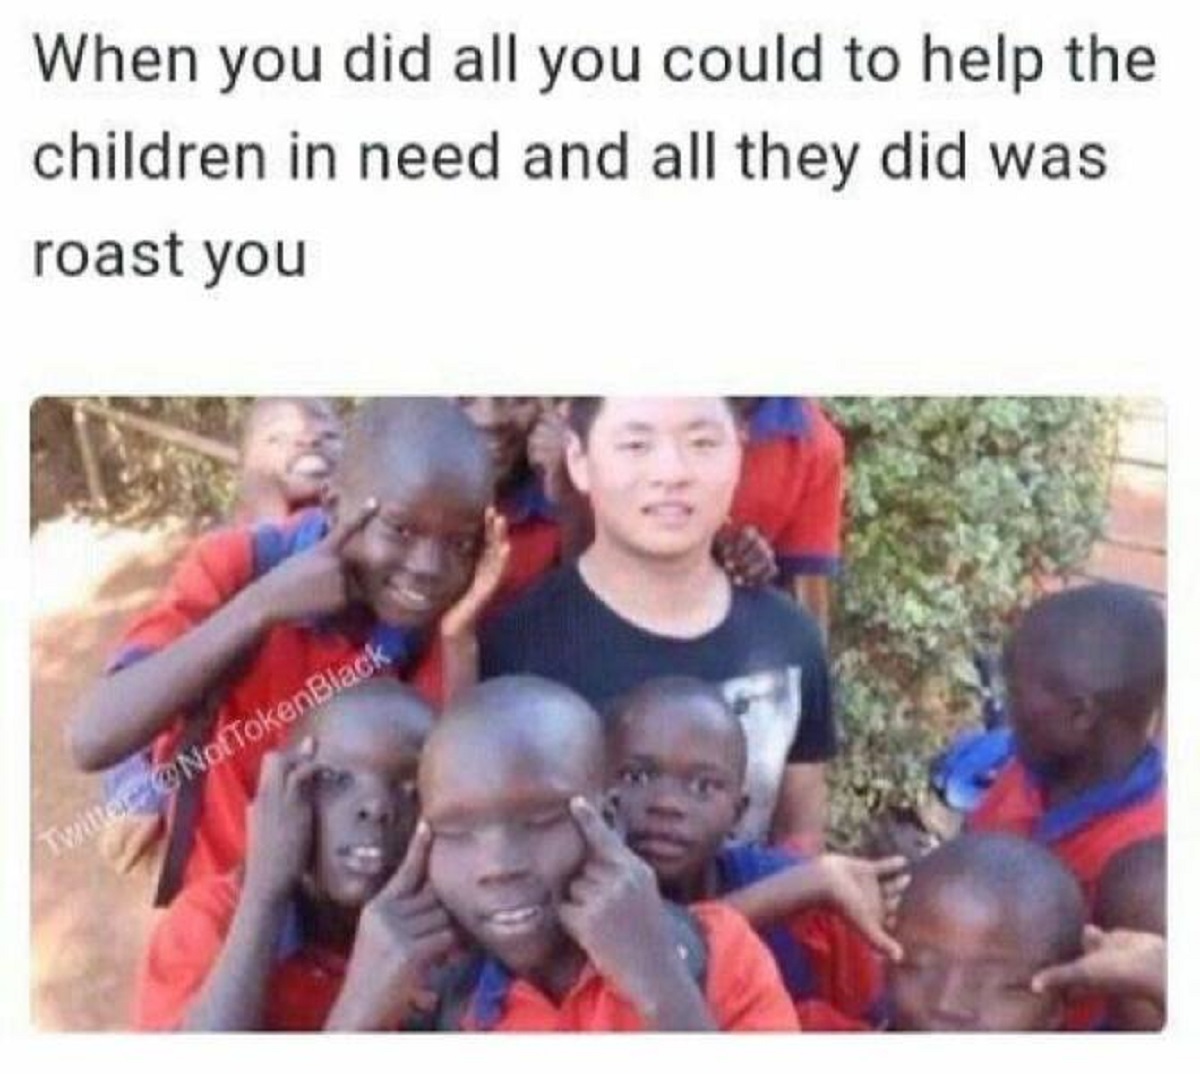 photo caption - When you did all you could to help the children in need and all they did was roast you Twitter